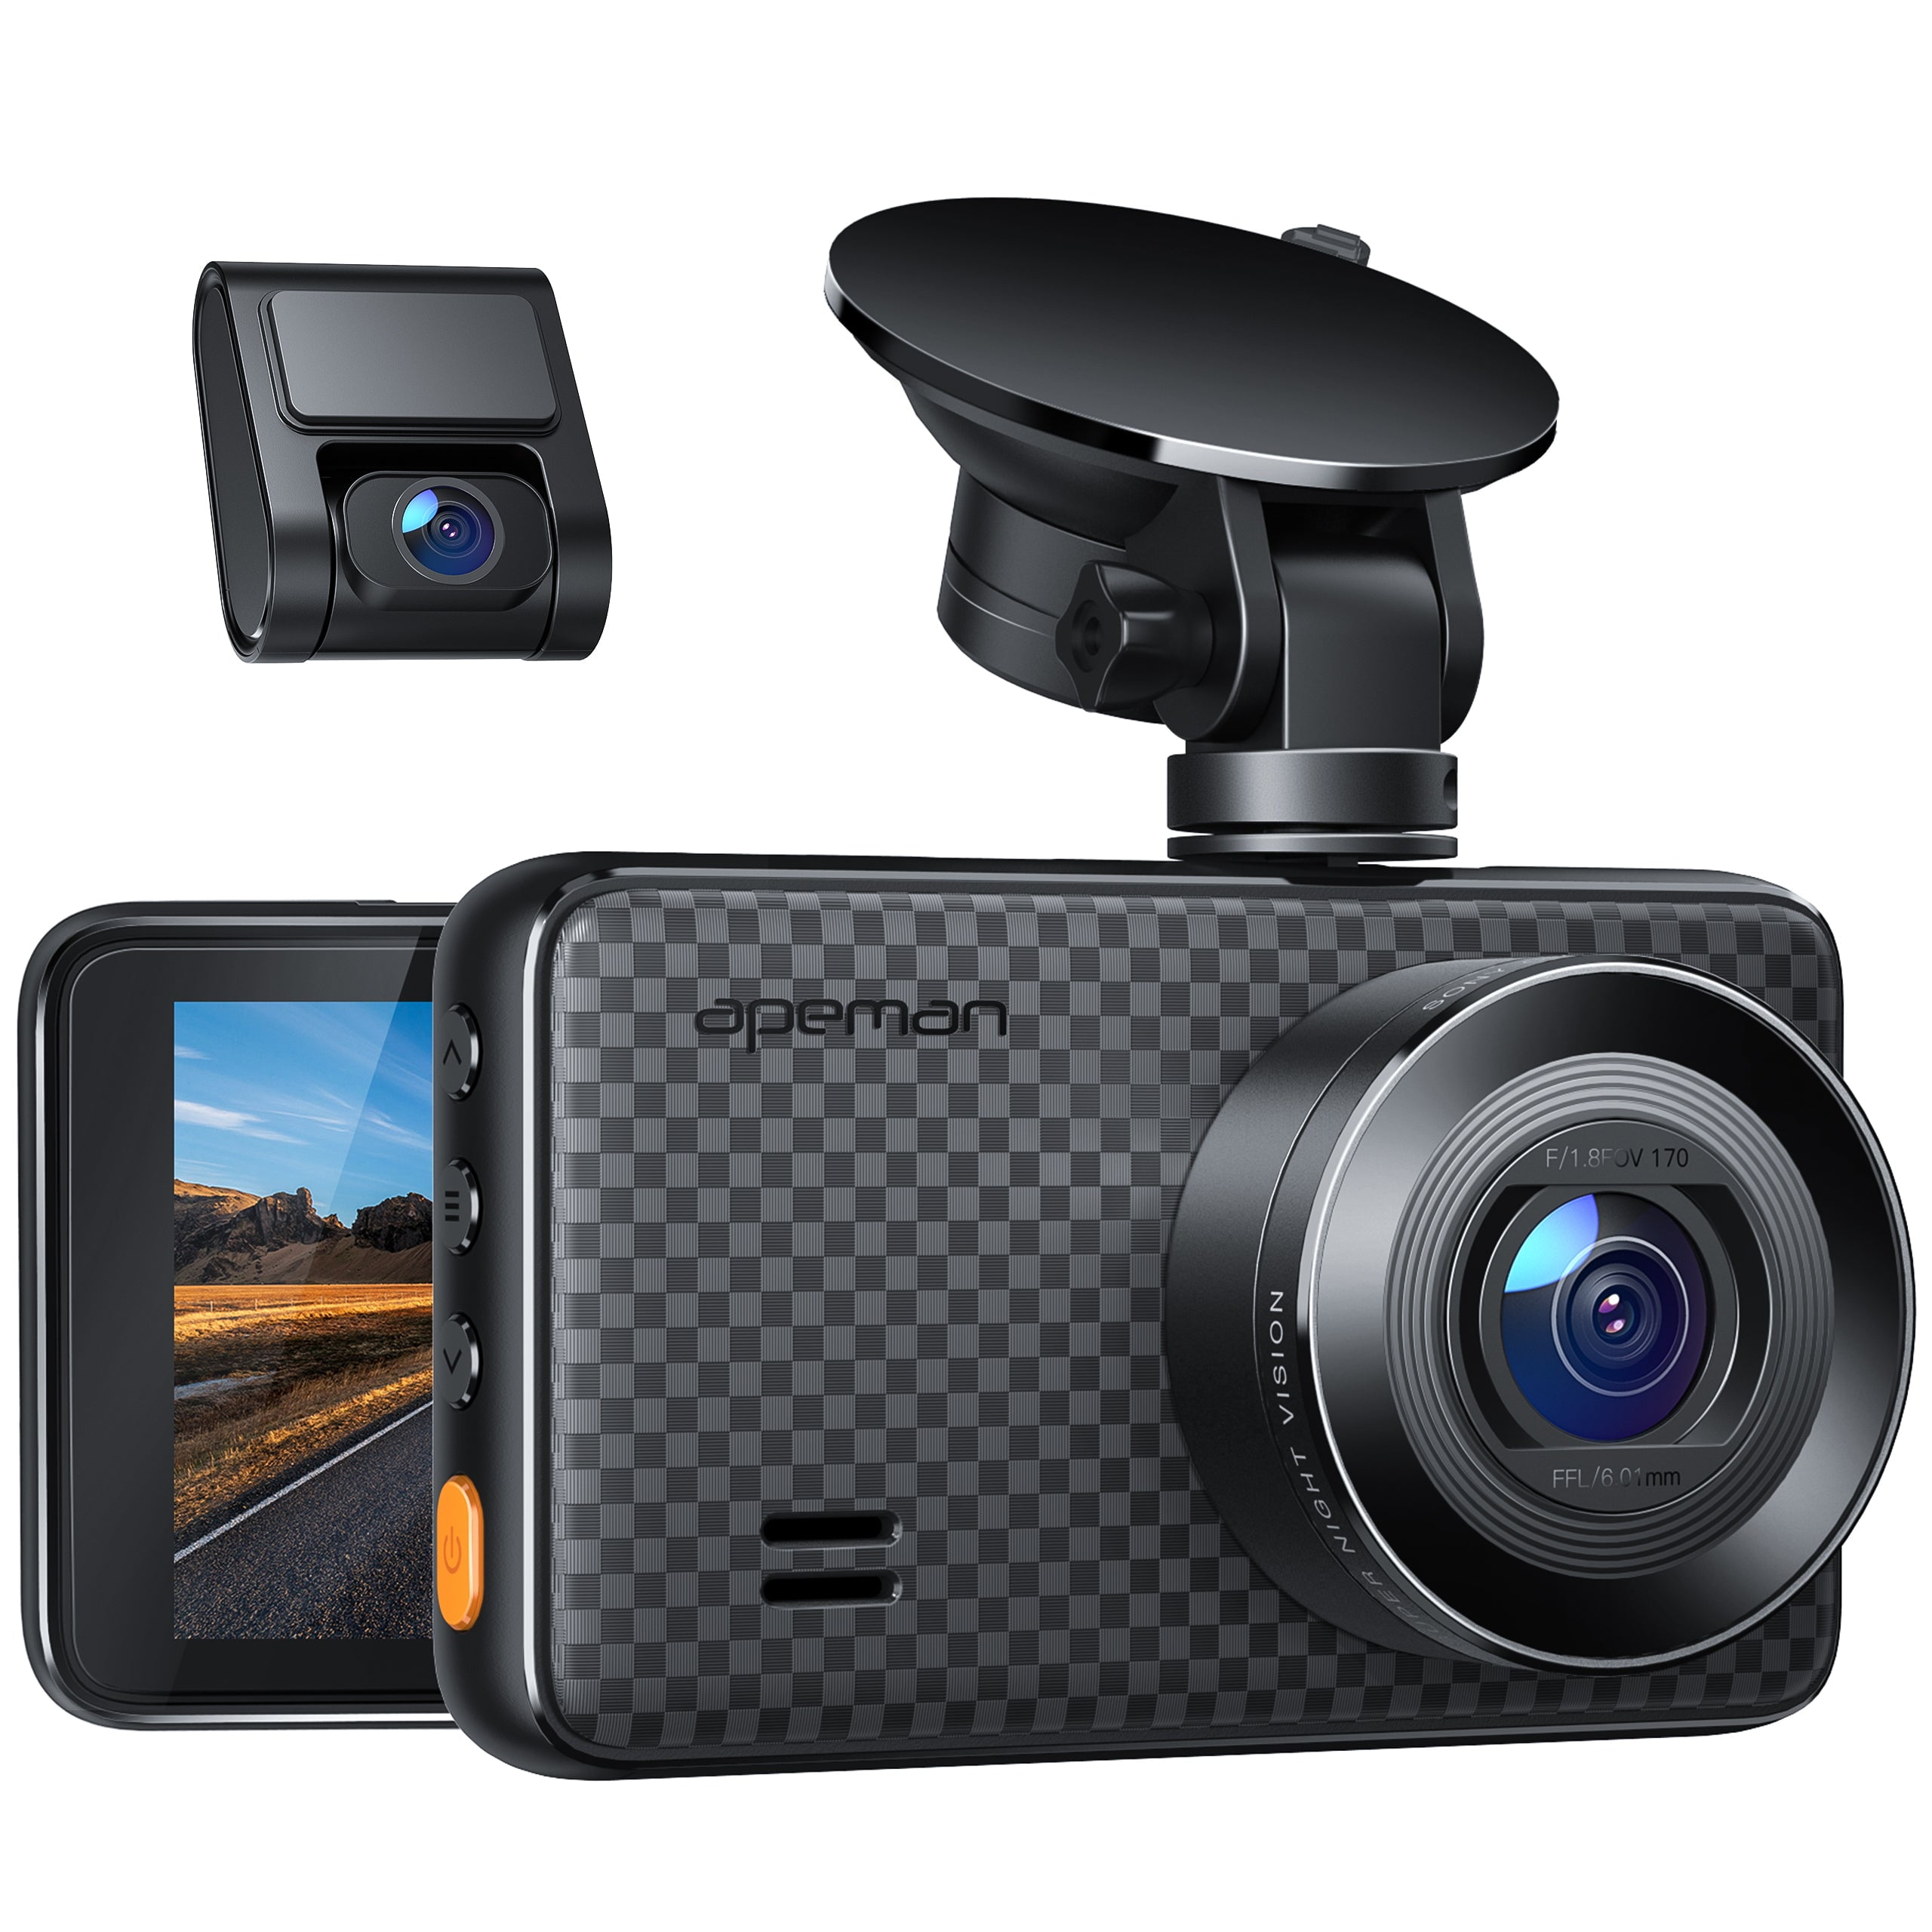 Apeman 1440P&1080P Dual Dash Cam, 1520p Max, Front and Rear Camera for Cars with 3 inch IPS Screen, Support 128gb, Driving Recorder with IR Sensor